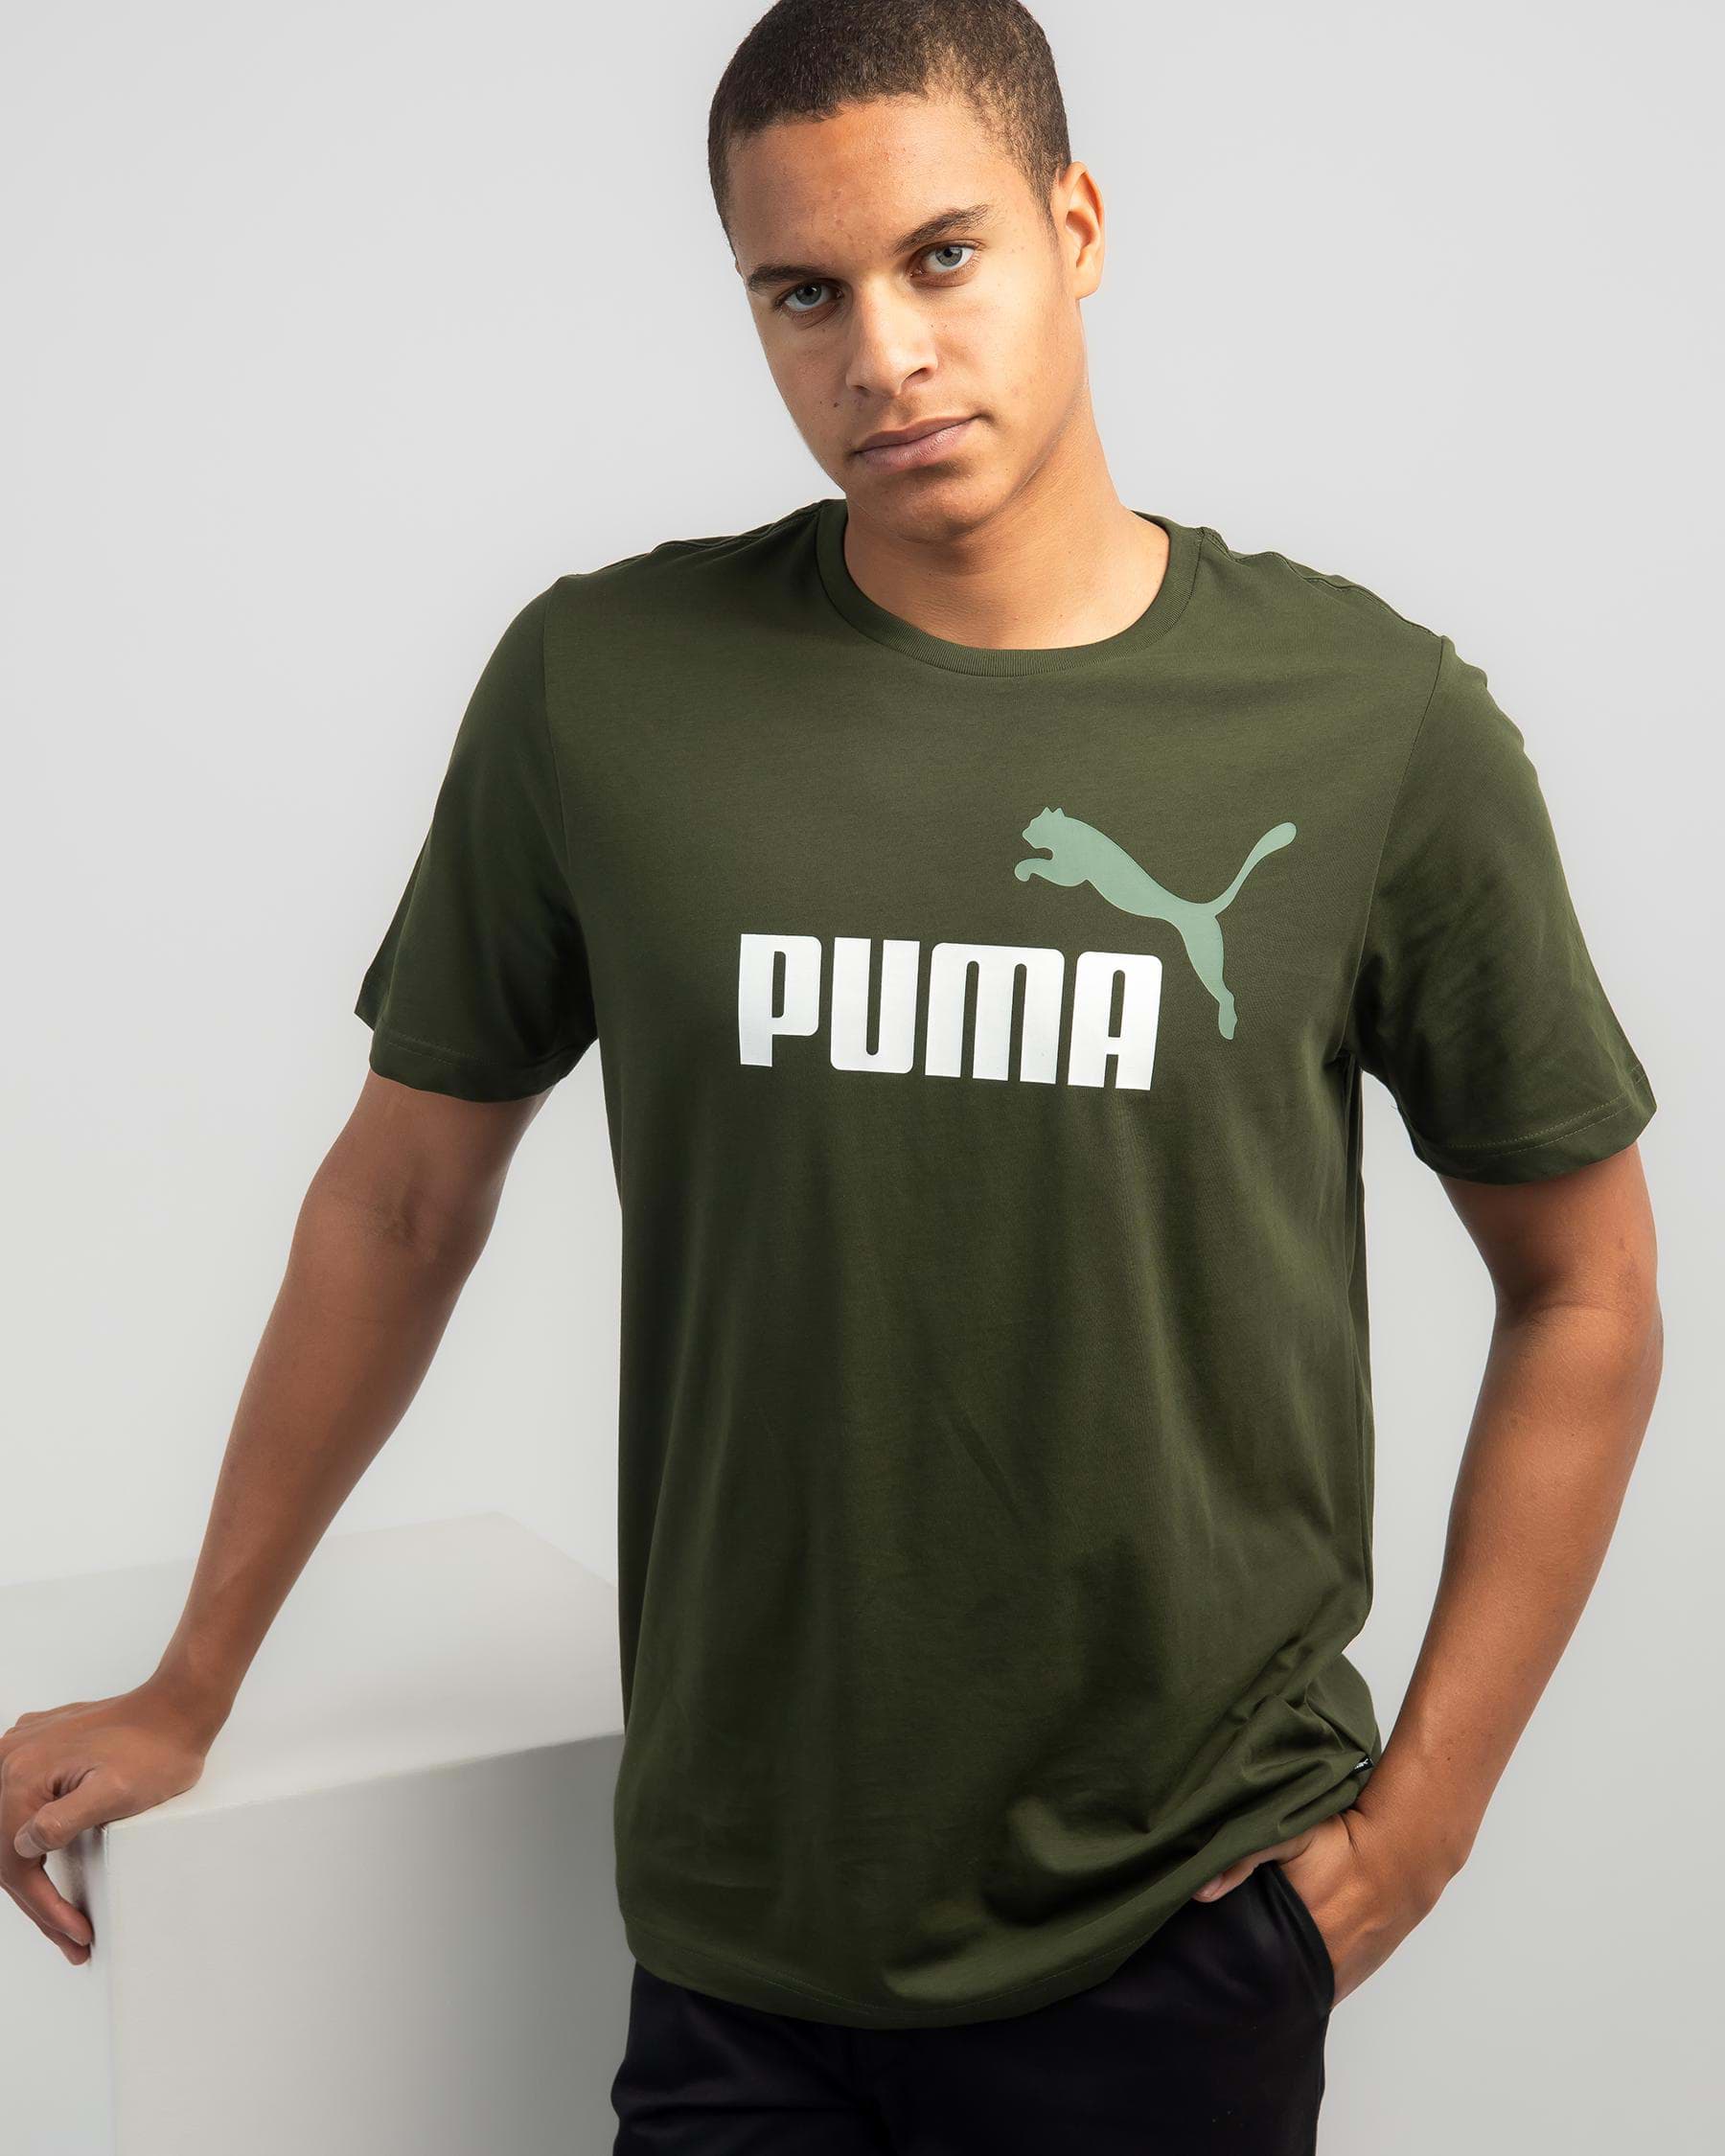 United Puma States Returns FREE* Col & - City Logo ESS+2 Myrtle Beach T-Shirt Shipping Easy - In